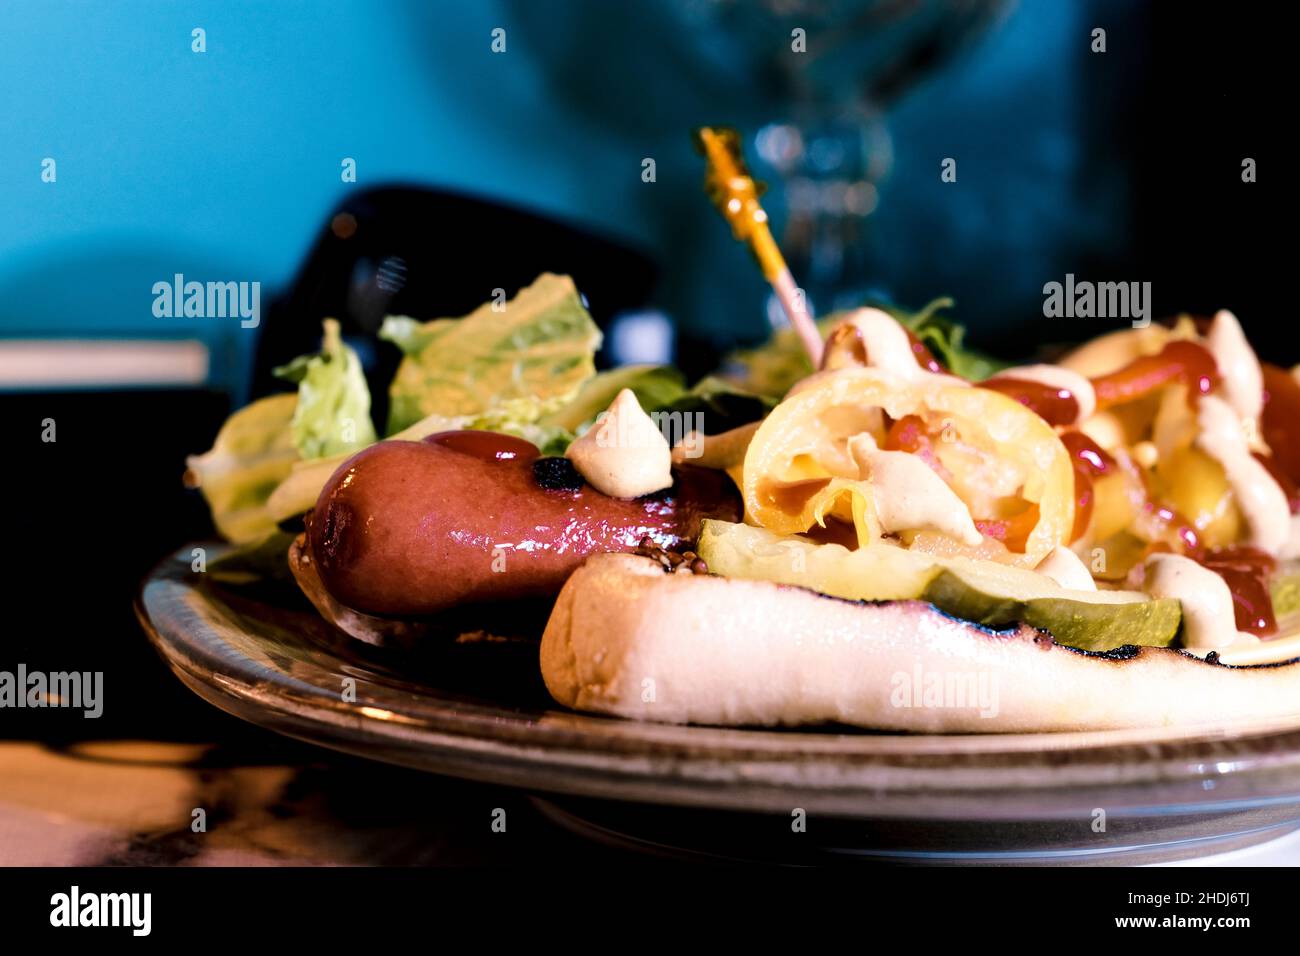 The works hot dog with retro landline corded phone in the background Stock Photo